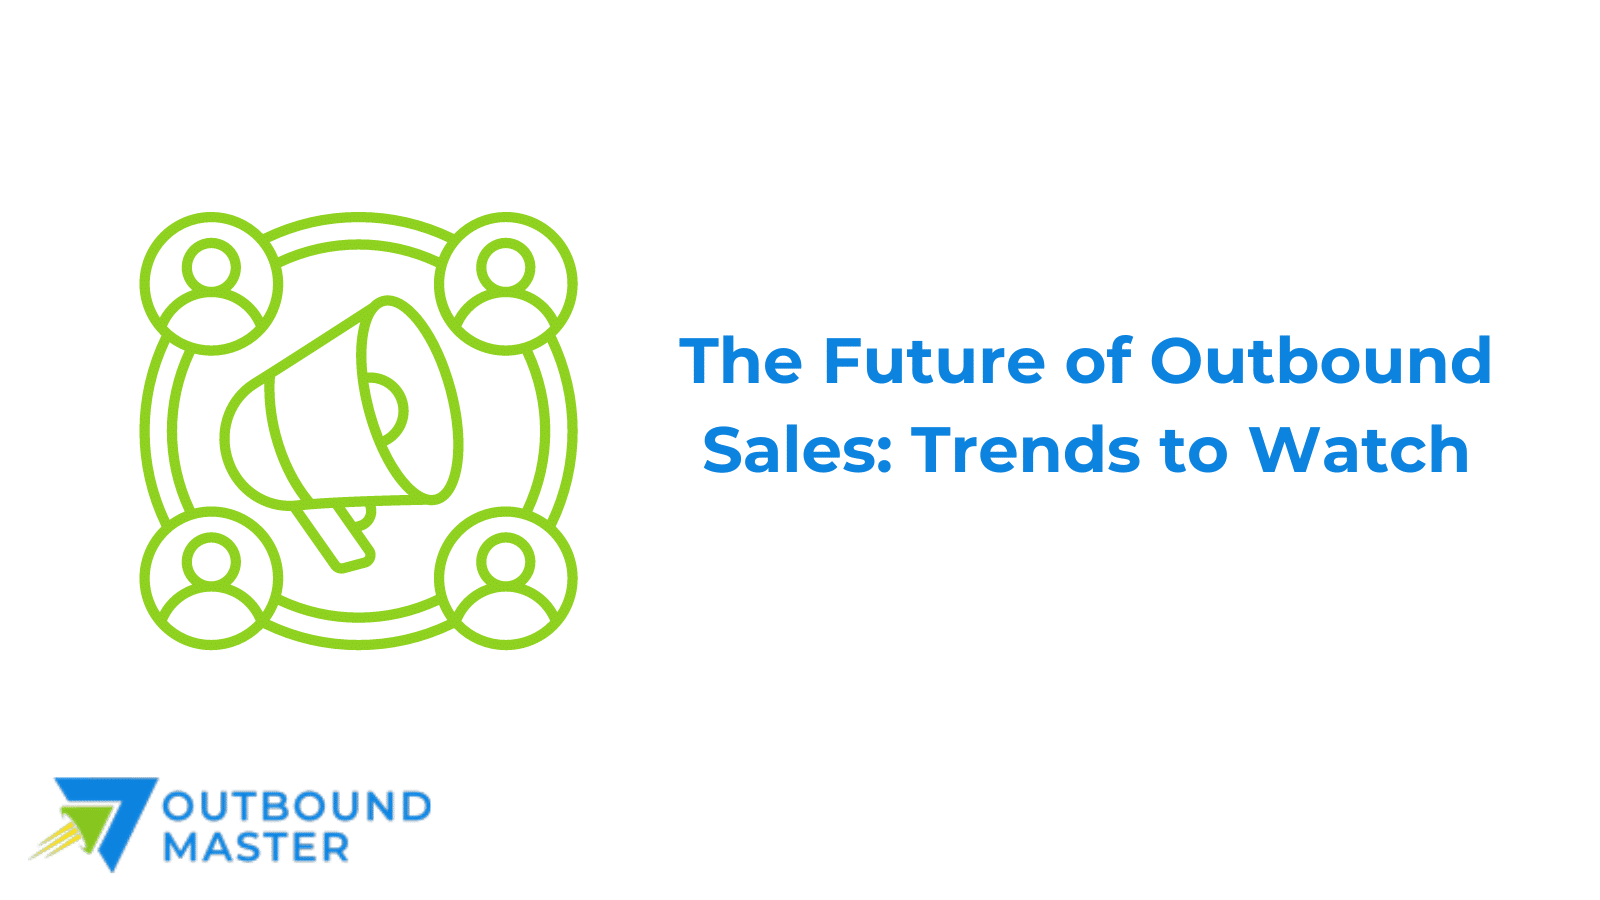 The Future of Outbound Sales: Trends to Watch